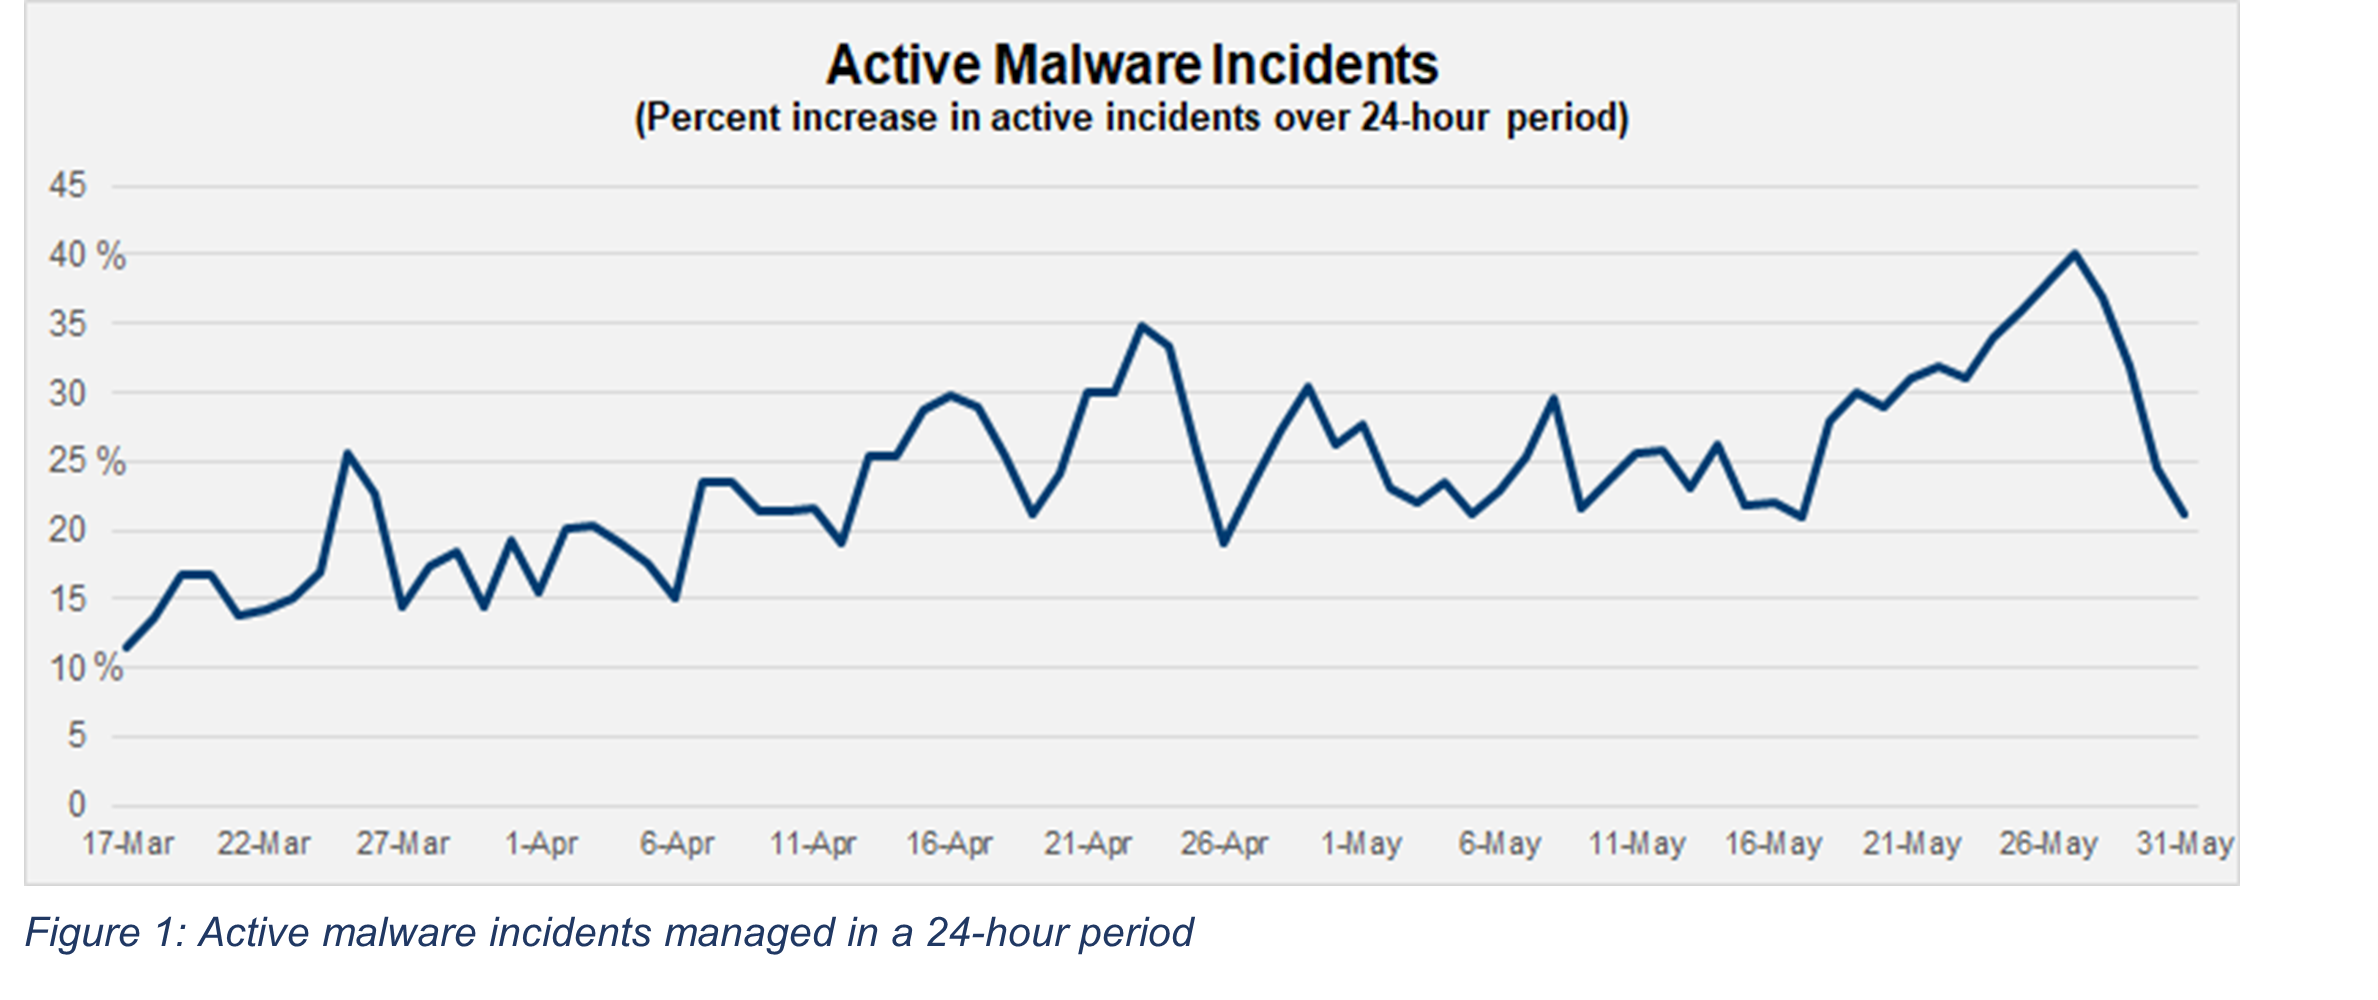 Active malware incidents managed in a 24-hour period